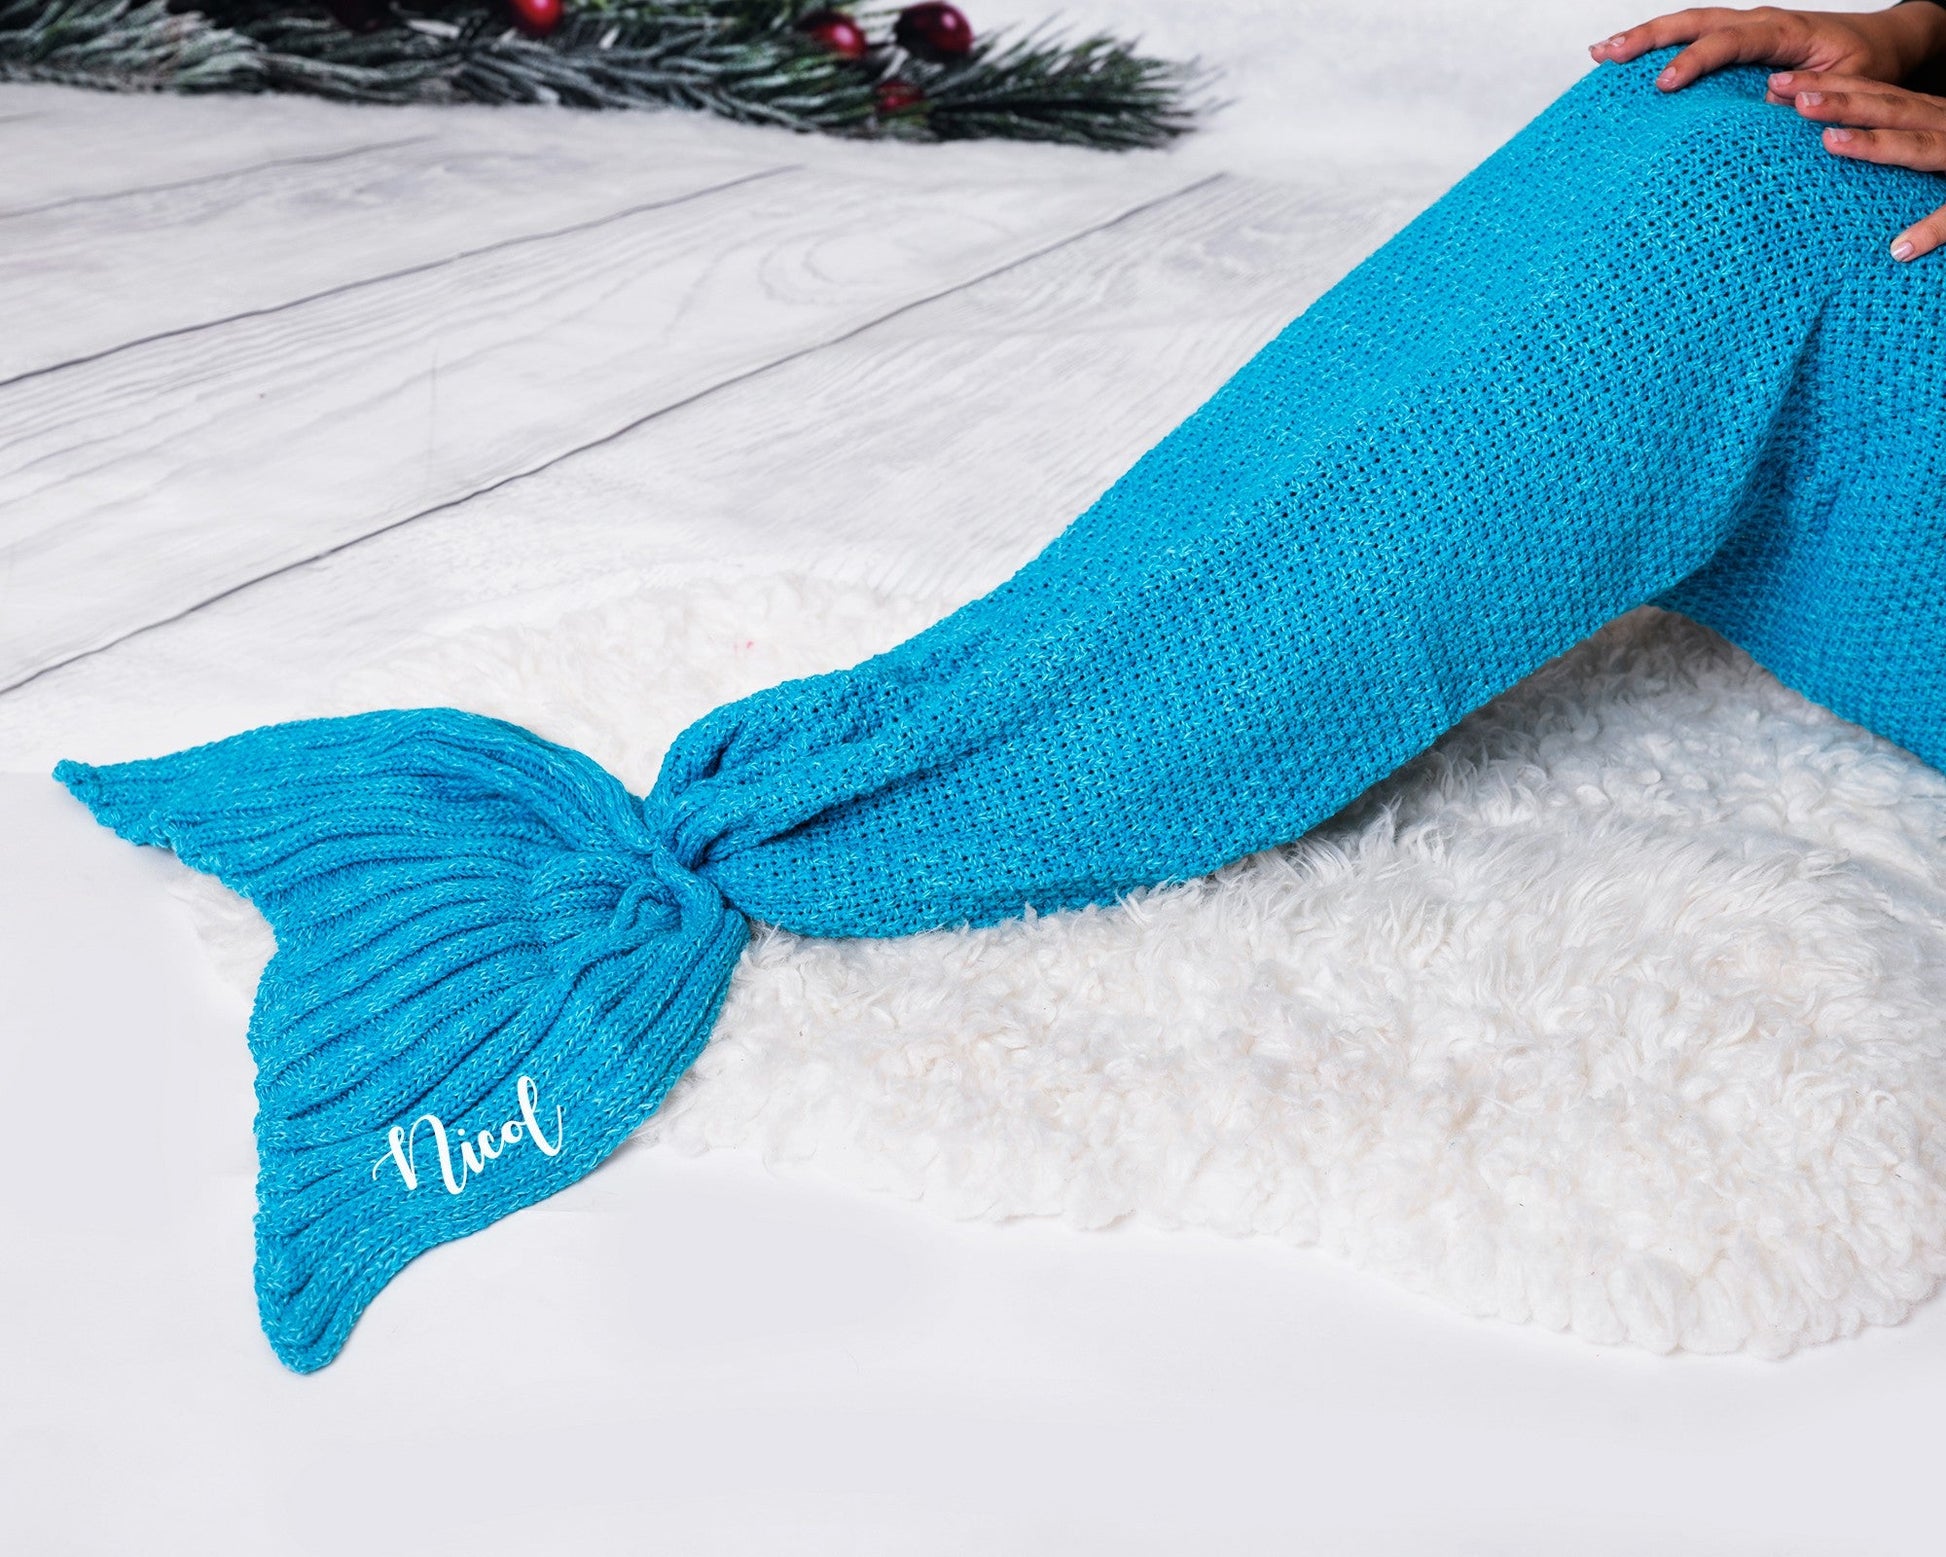 Kids Mermaid Tail Blanket - One Size / Blue - Kids clothes